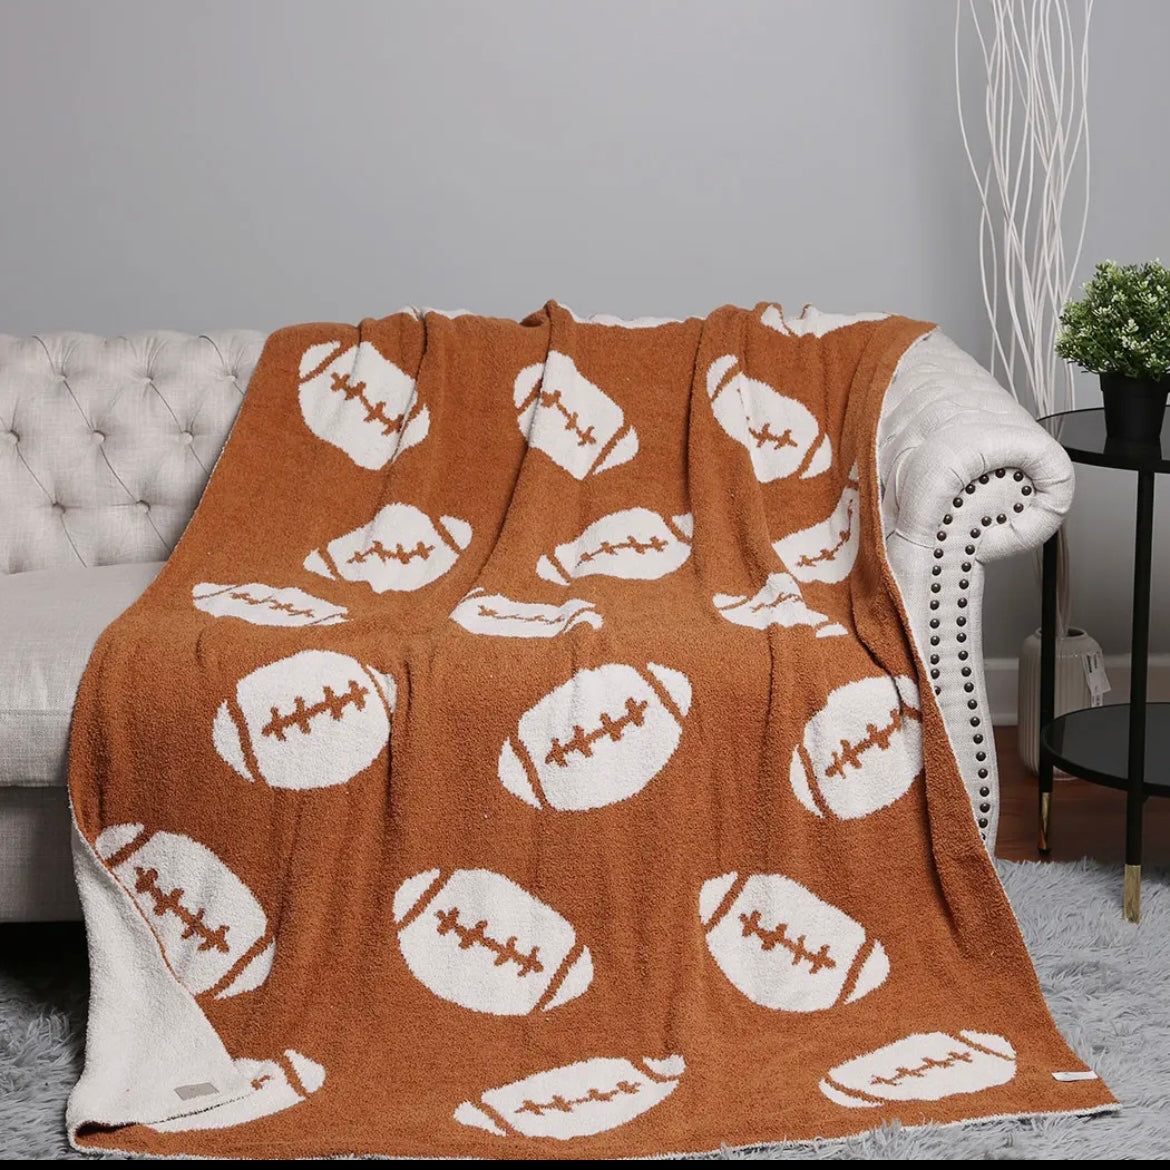 The Softest Ever Football Blanket